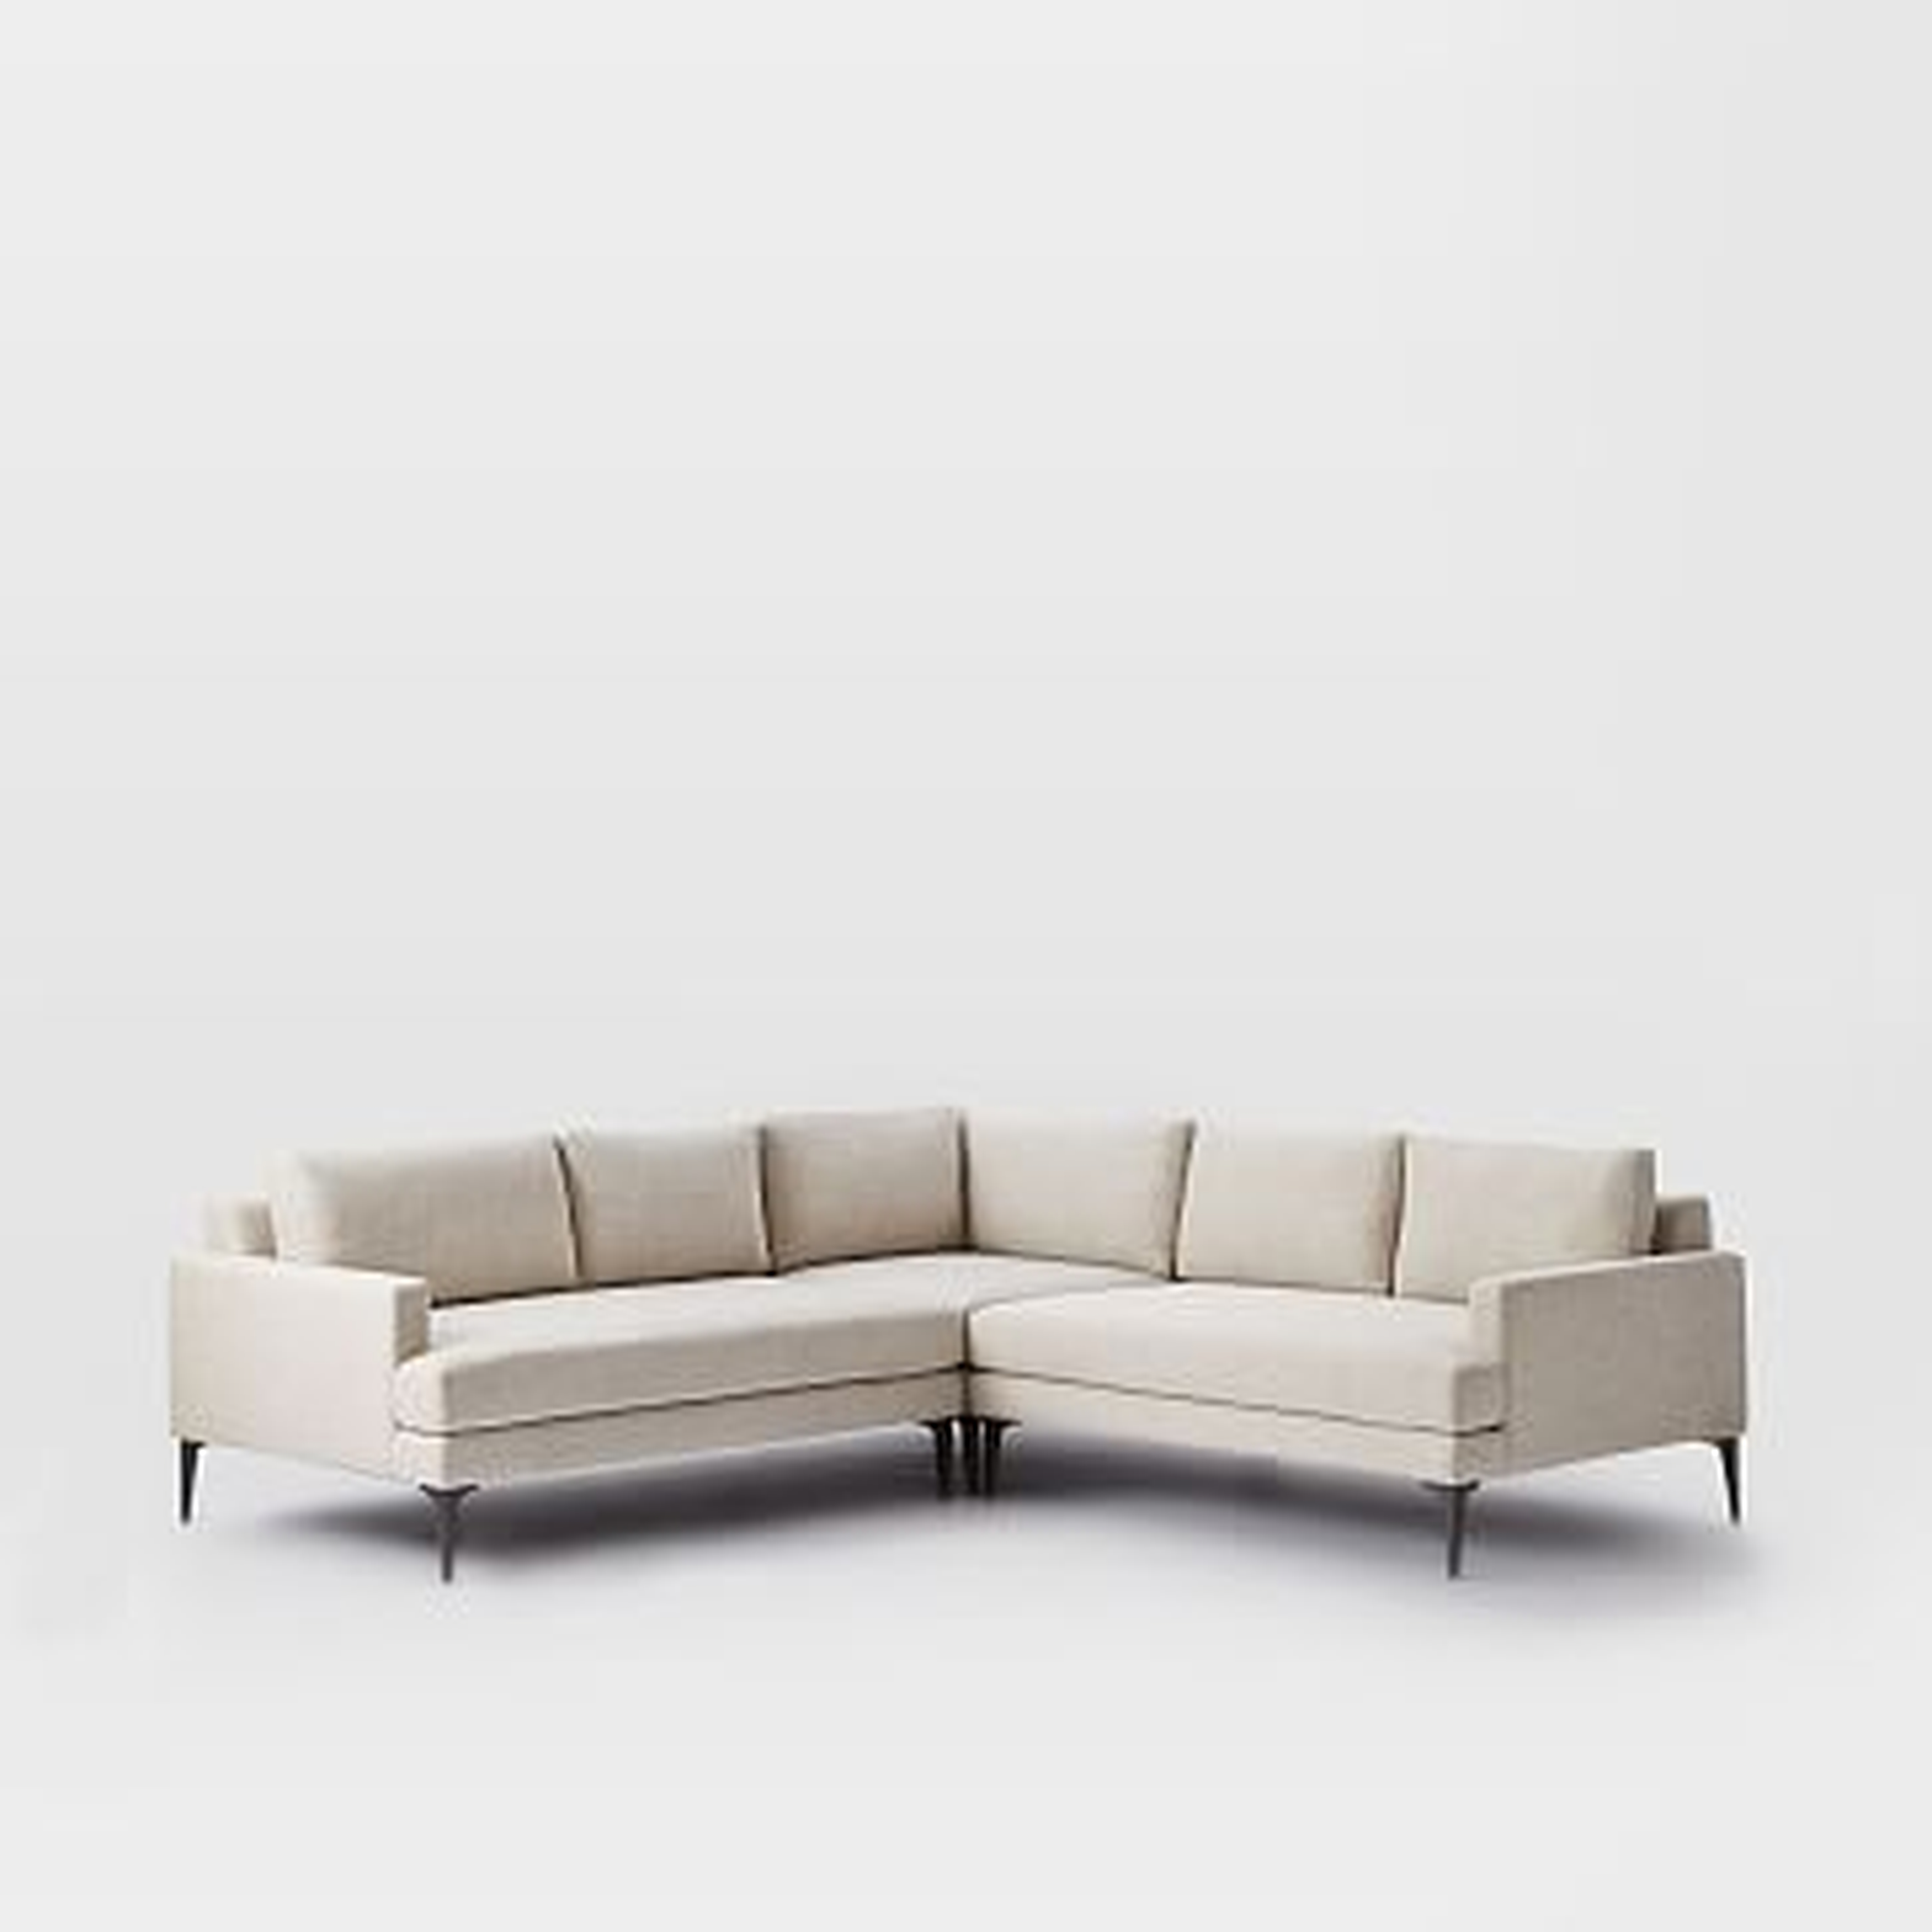 Andes  Set 6, Right Arm 2 Seater Sofa, Left Arm 2 Seater Sofa, Corner, Twill, Stone - West Elm